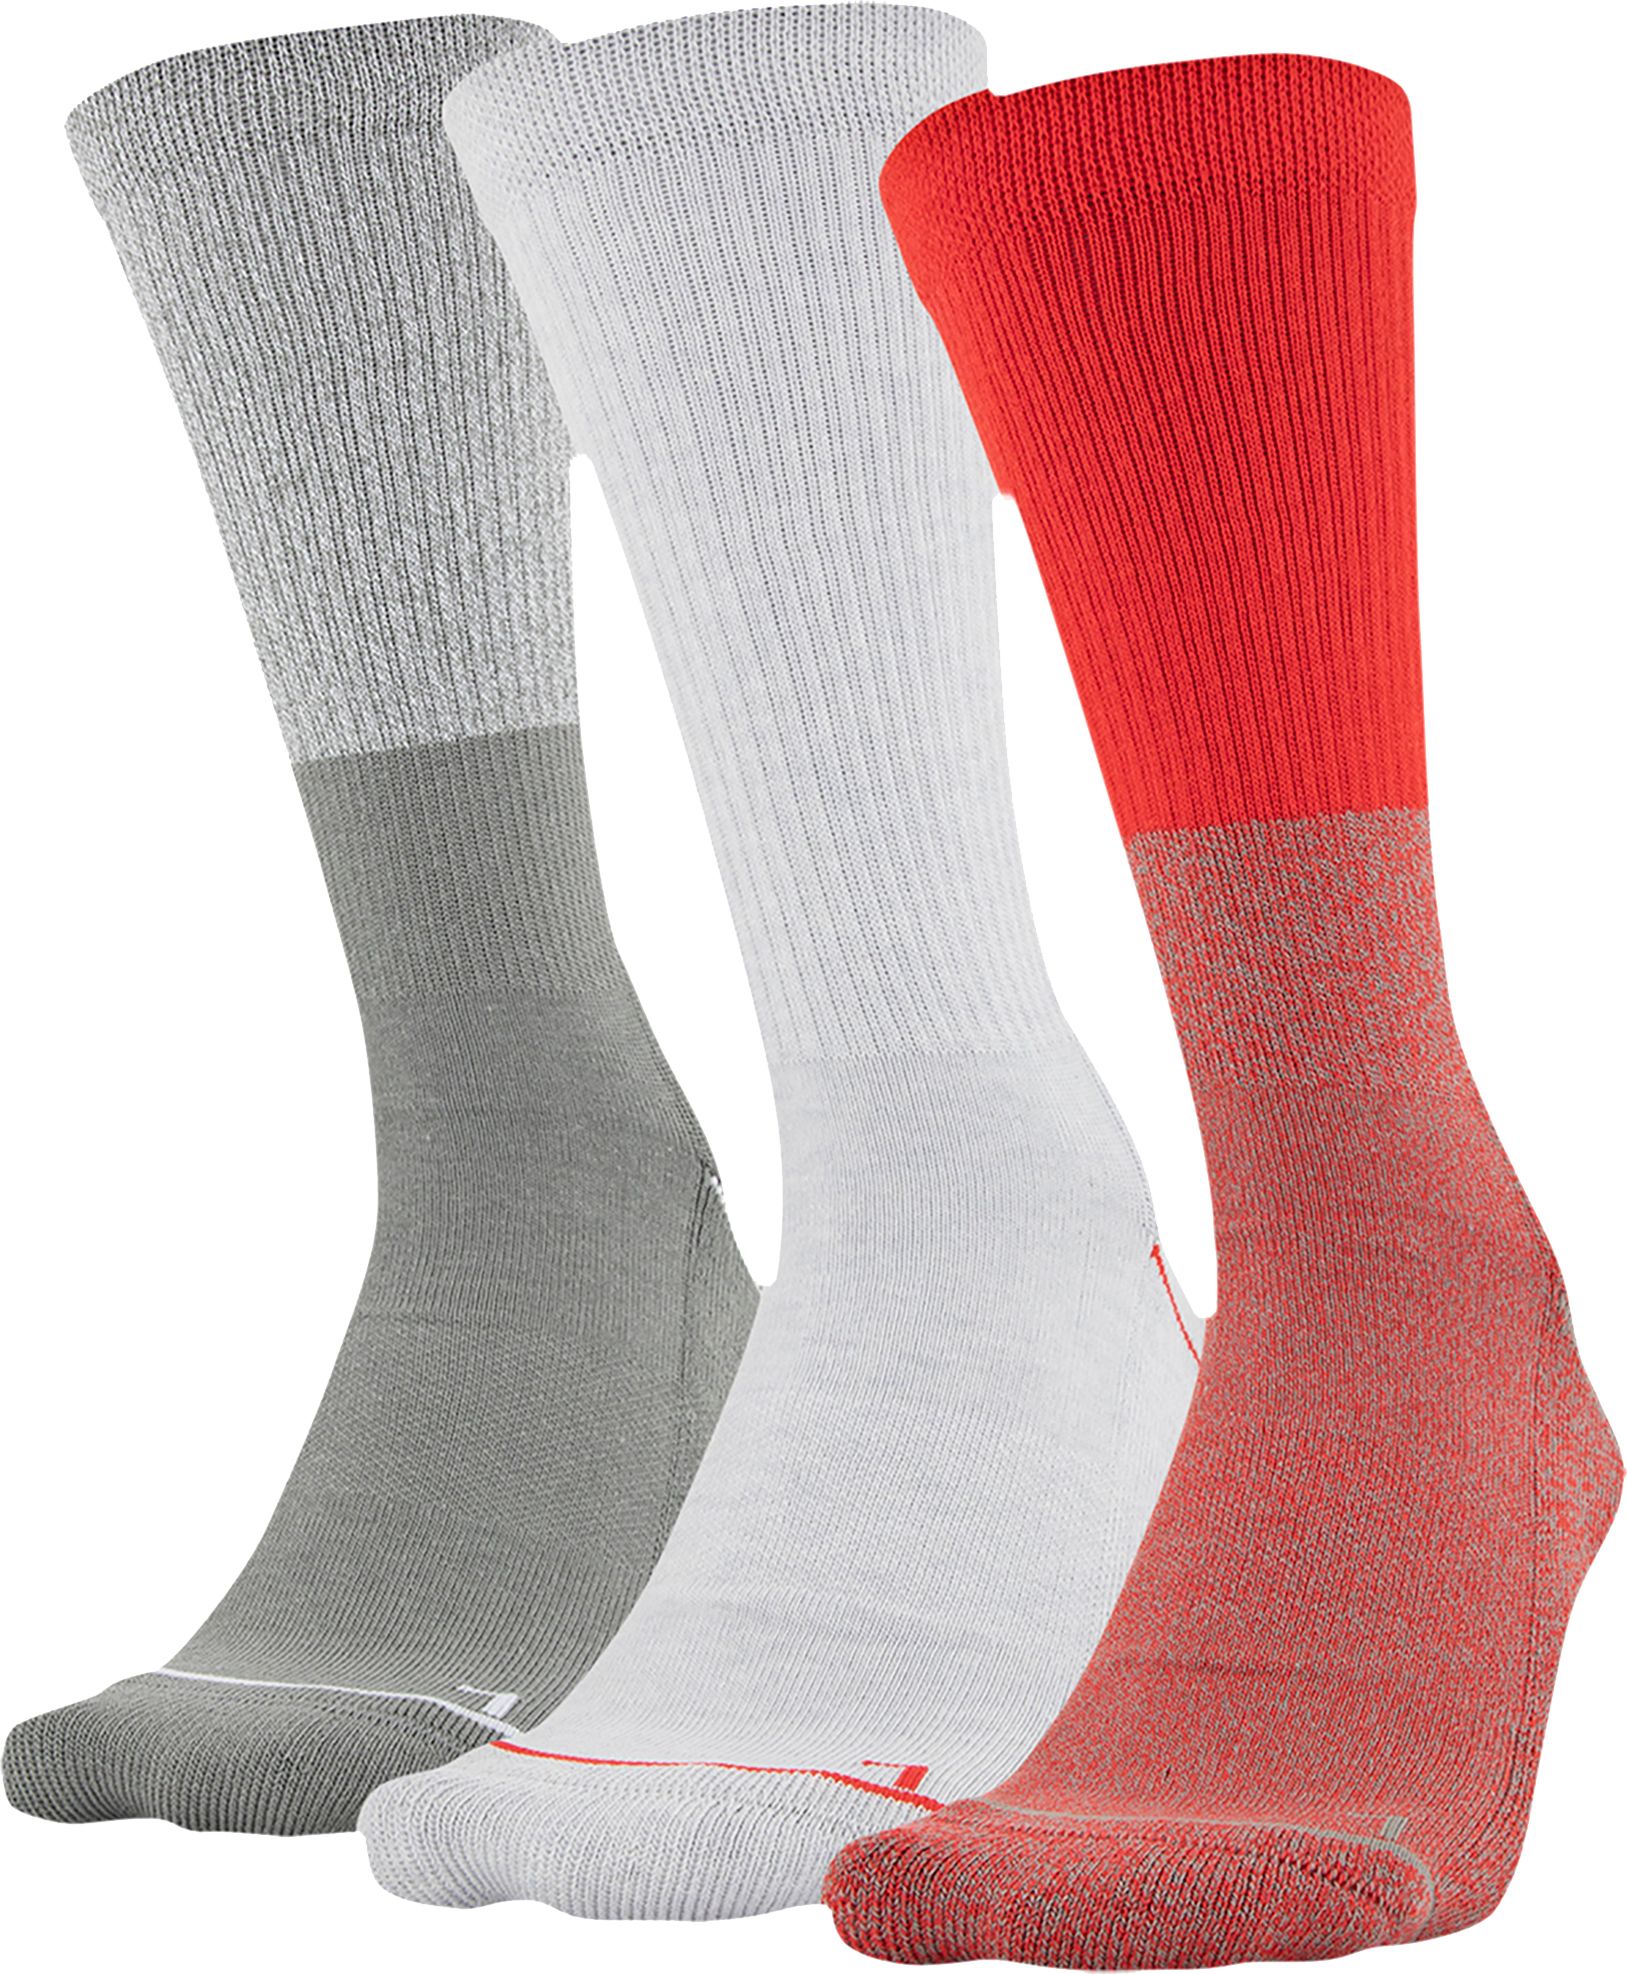 under armour project rock socks